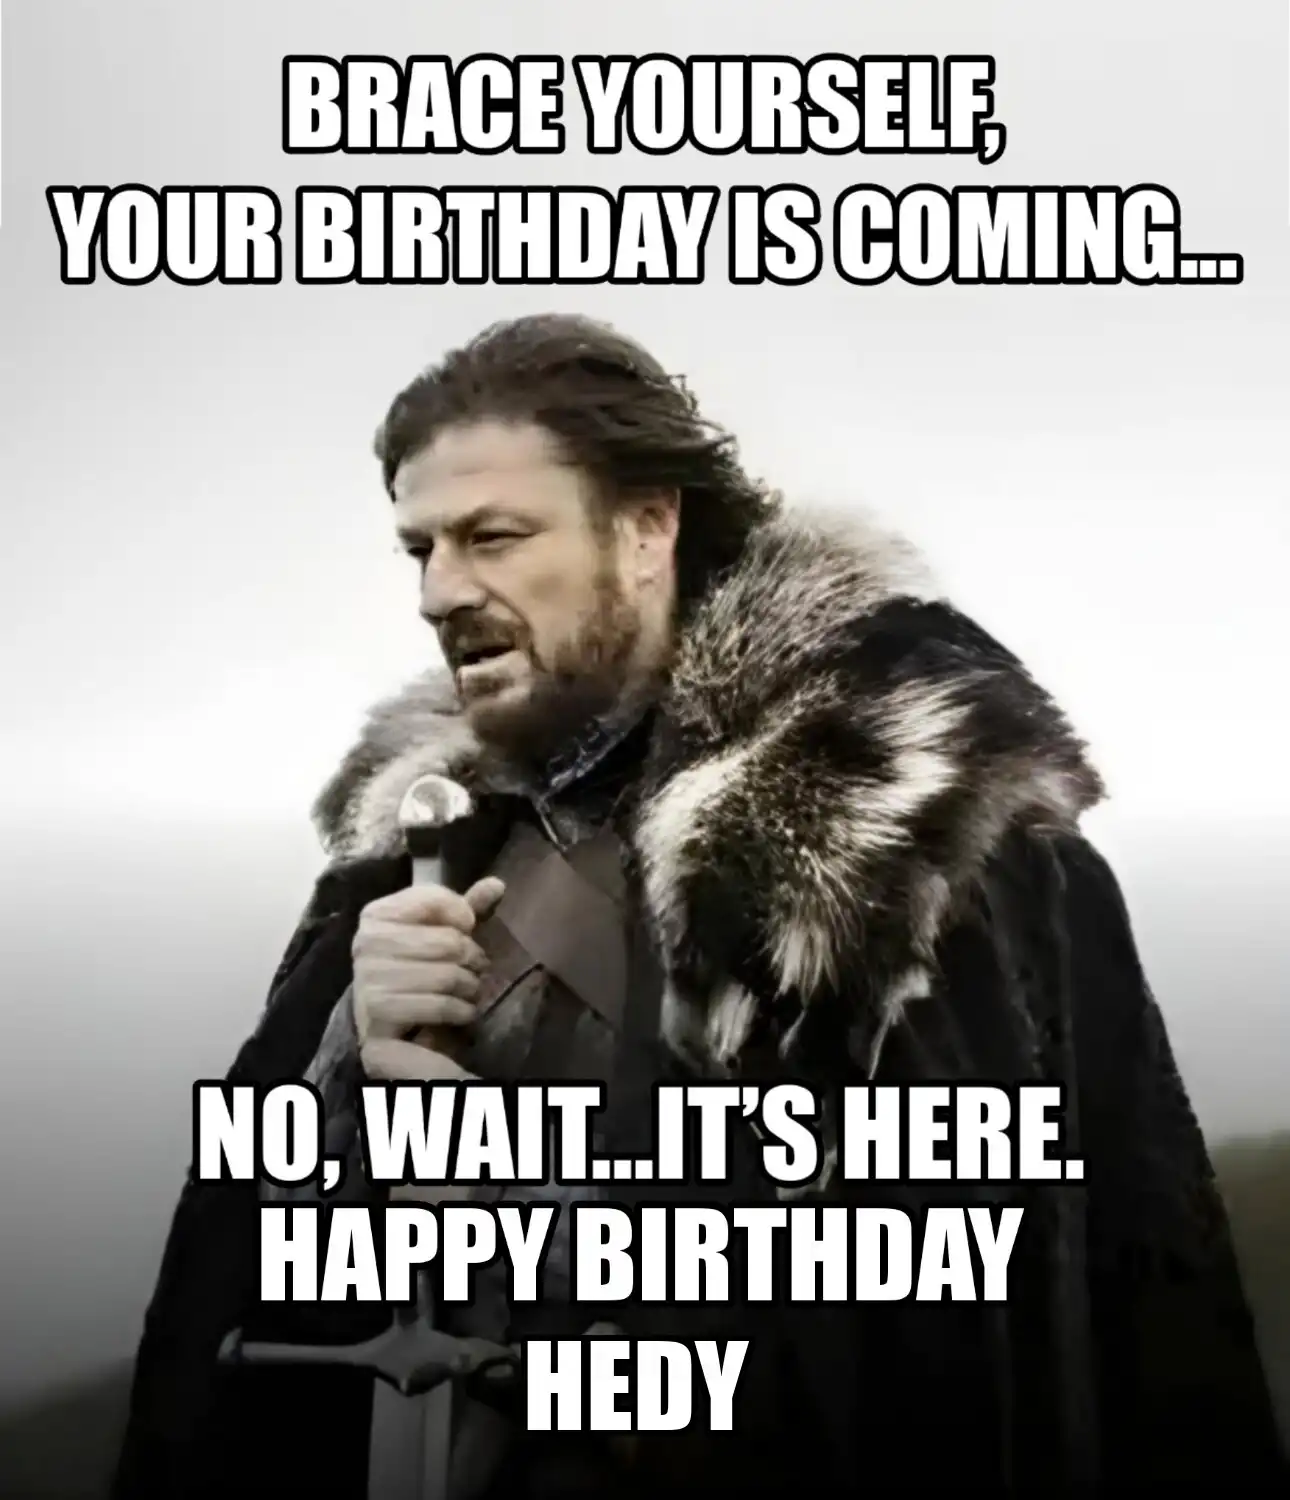 Happy Birthday Hedy Brace Yourself Your Birthday Is Coming Meme